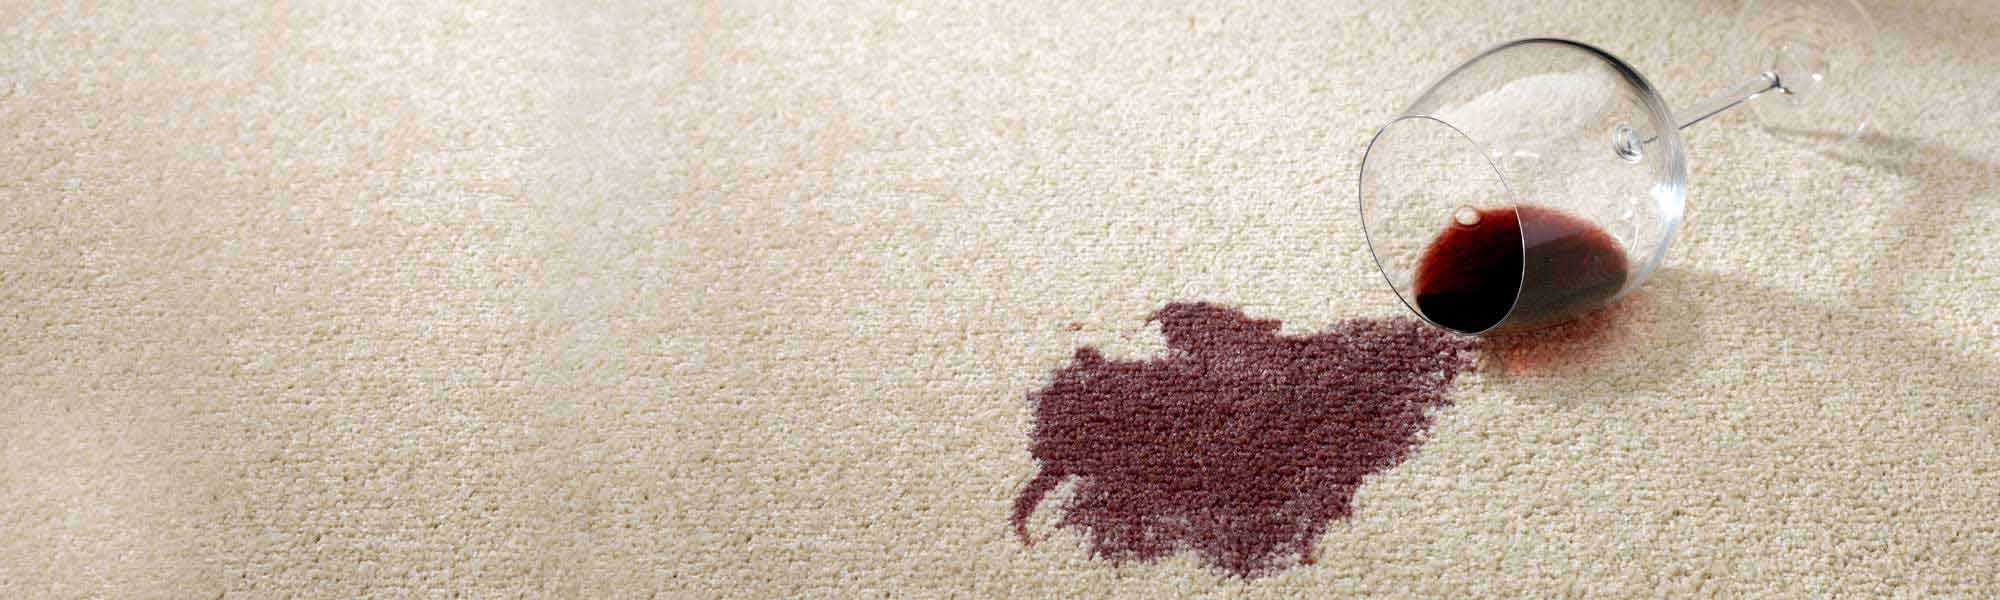 Professional Stain Removal Service by Aloha Chem-Dry in Kapolei